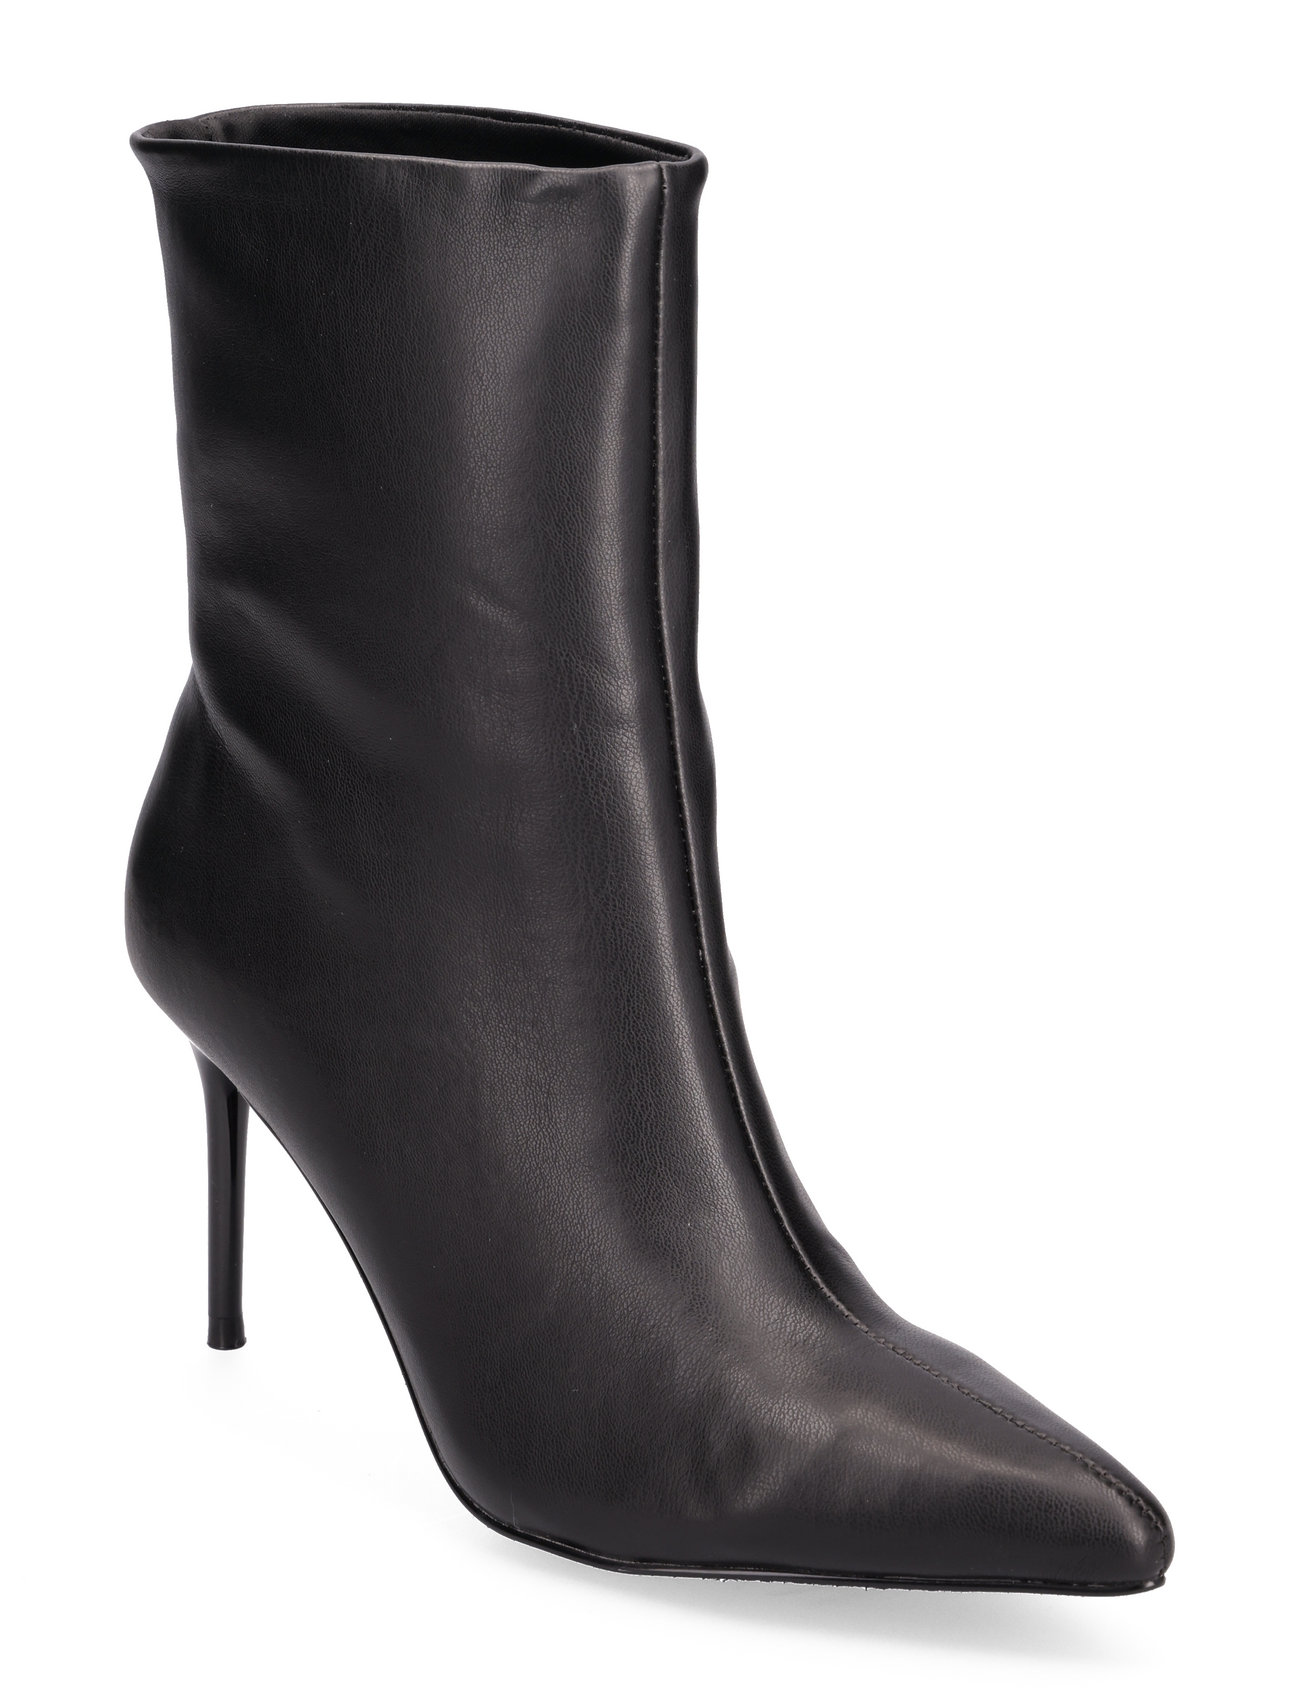 Lyricals Bootie Shoes Boots Ankle Boots Ankle Boots With Heel Black Steve Madden